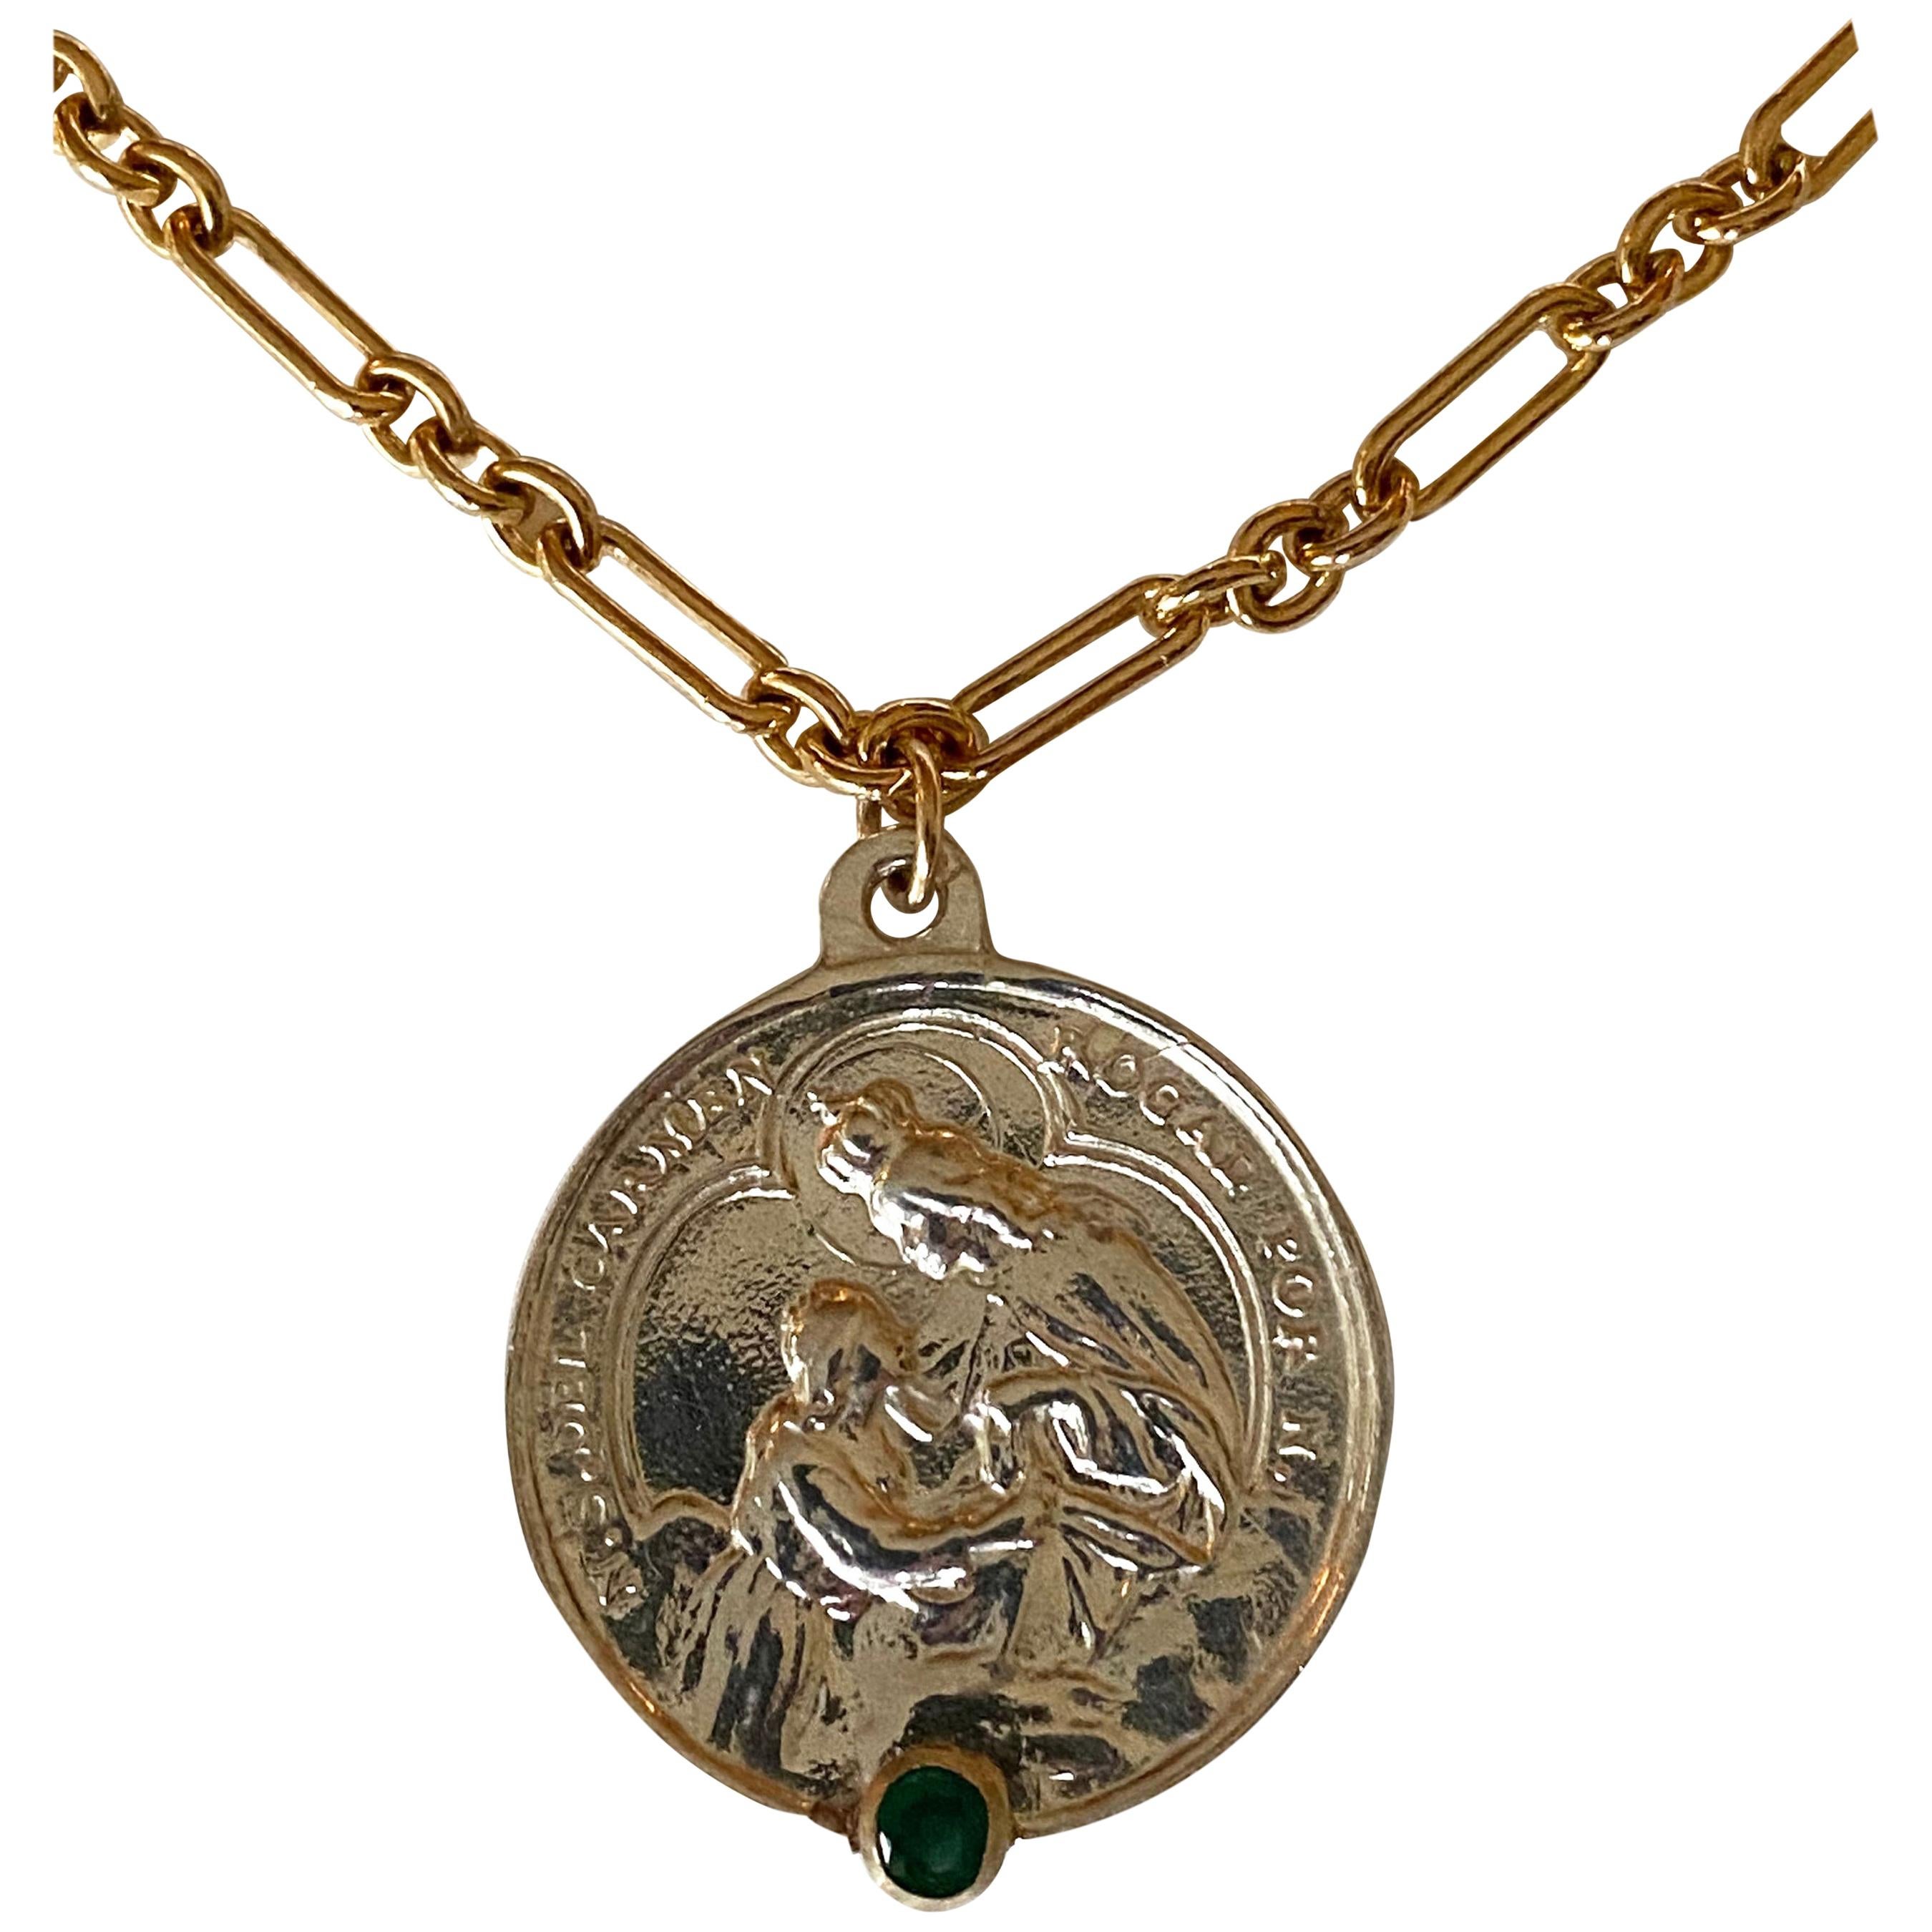 Emerald Sterling Silver Sacred Medal Necklace Chain Spiritual Religious
Gold Filled Chain

Exclusive piece with a Round Virgin Mary Medal in Silver with an Emerald set in a Gold Prong prong and with a gold filled Chain. Necklace is 16